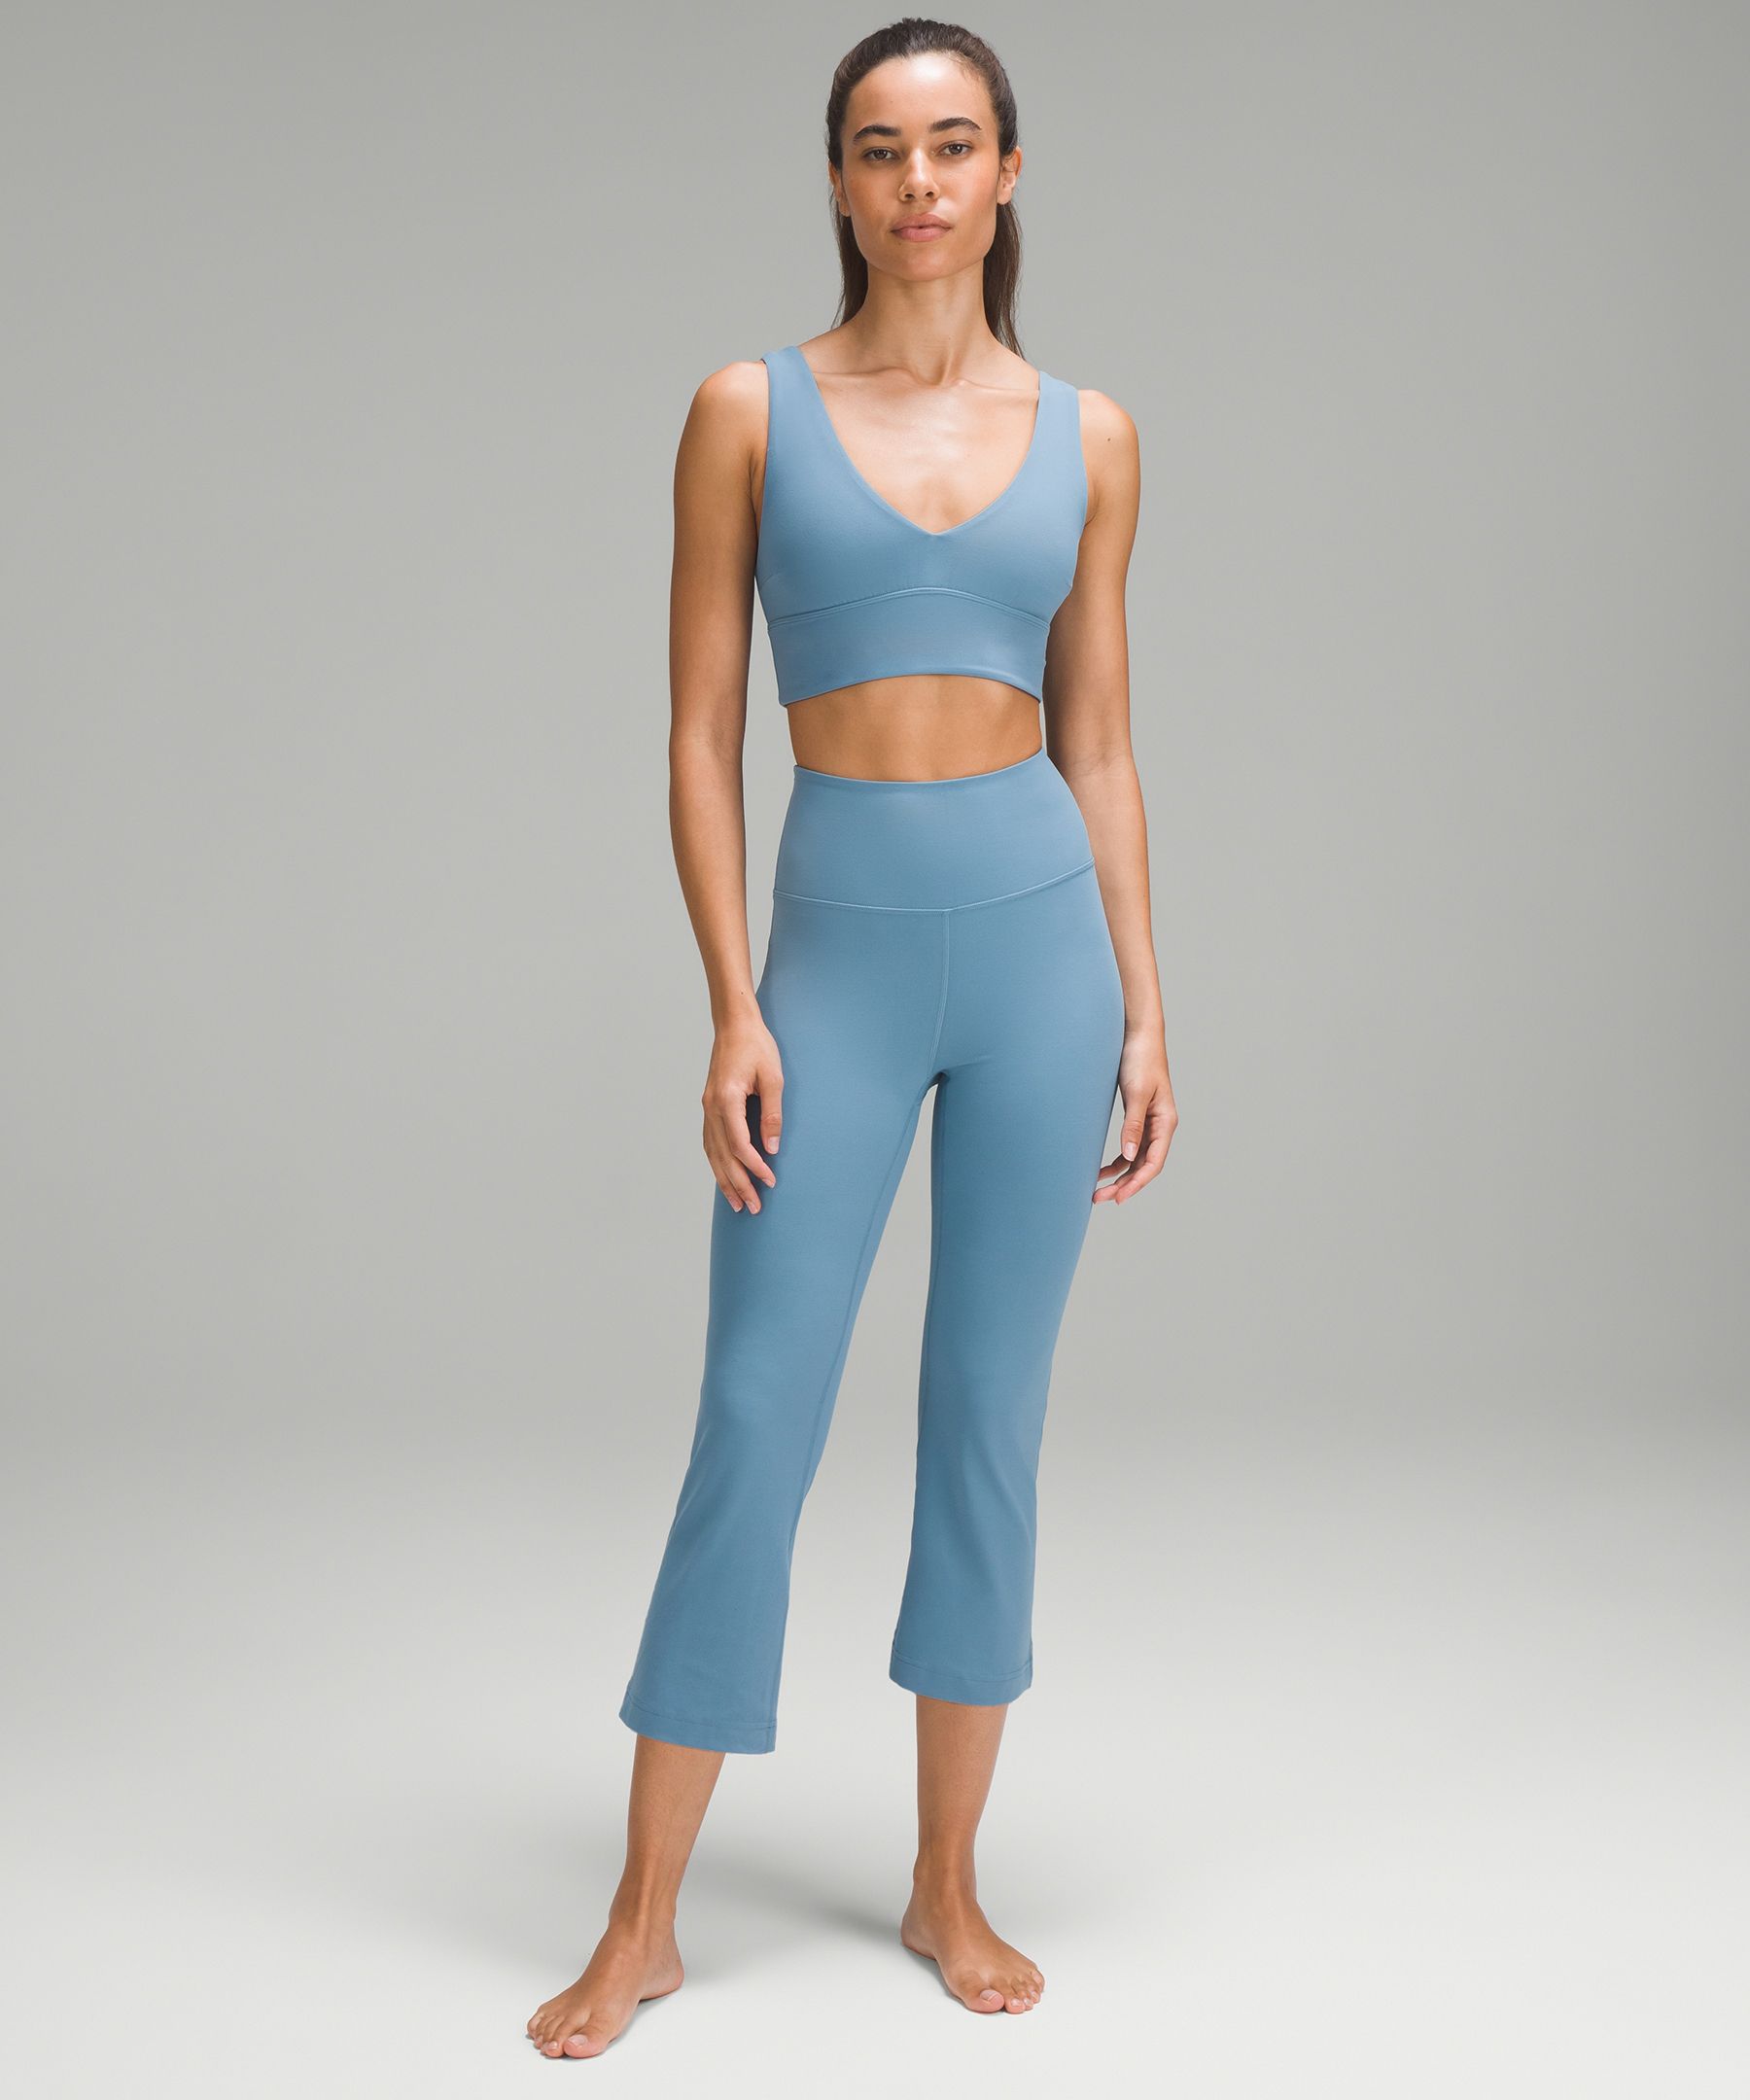 Nulu and Mesh Mid-Rise Yoga Crop 23